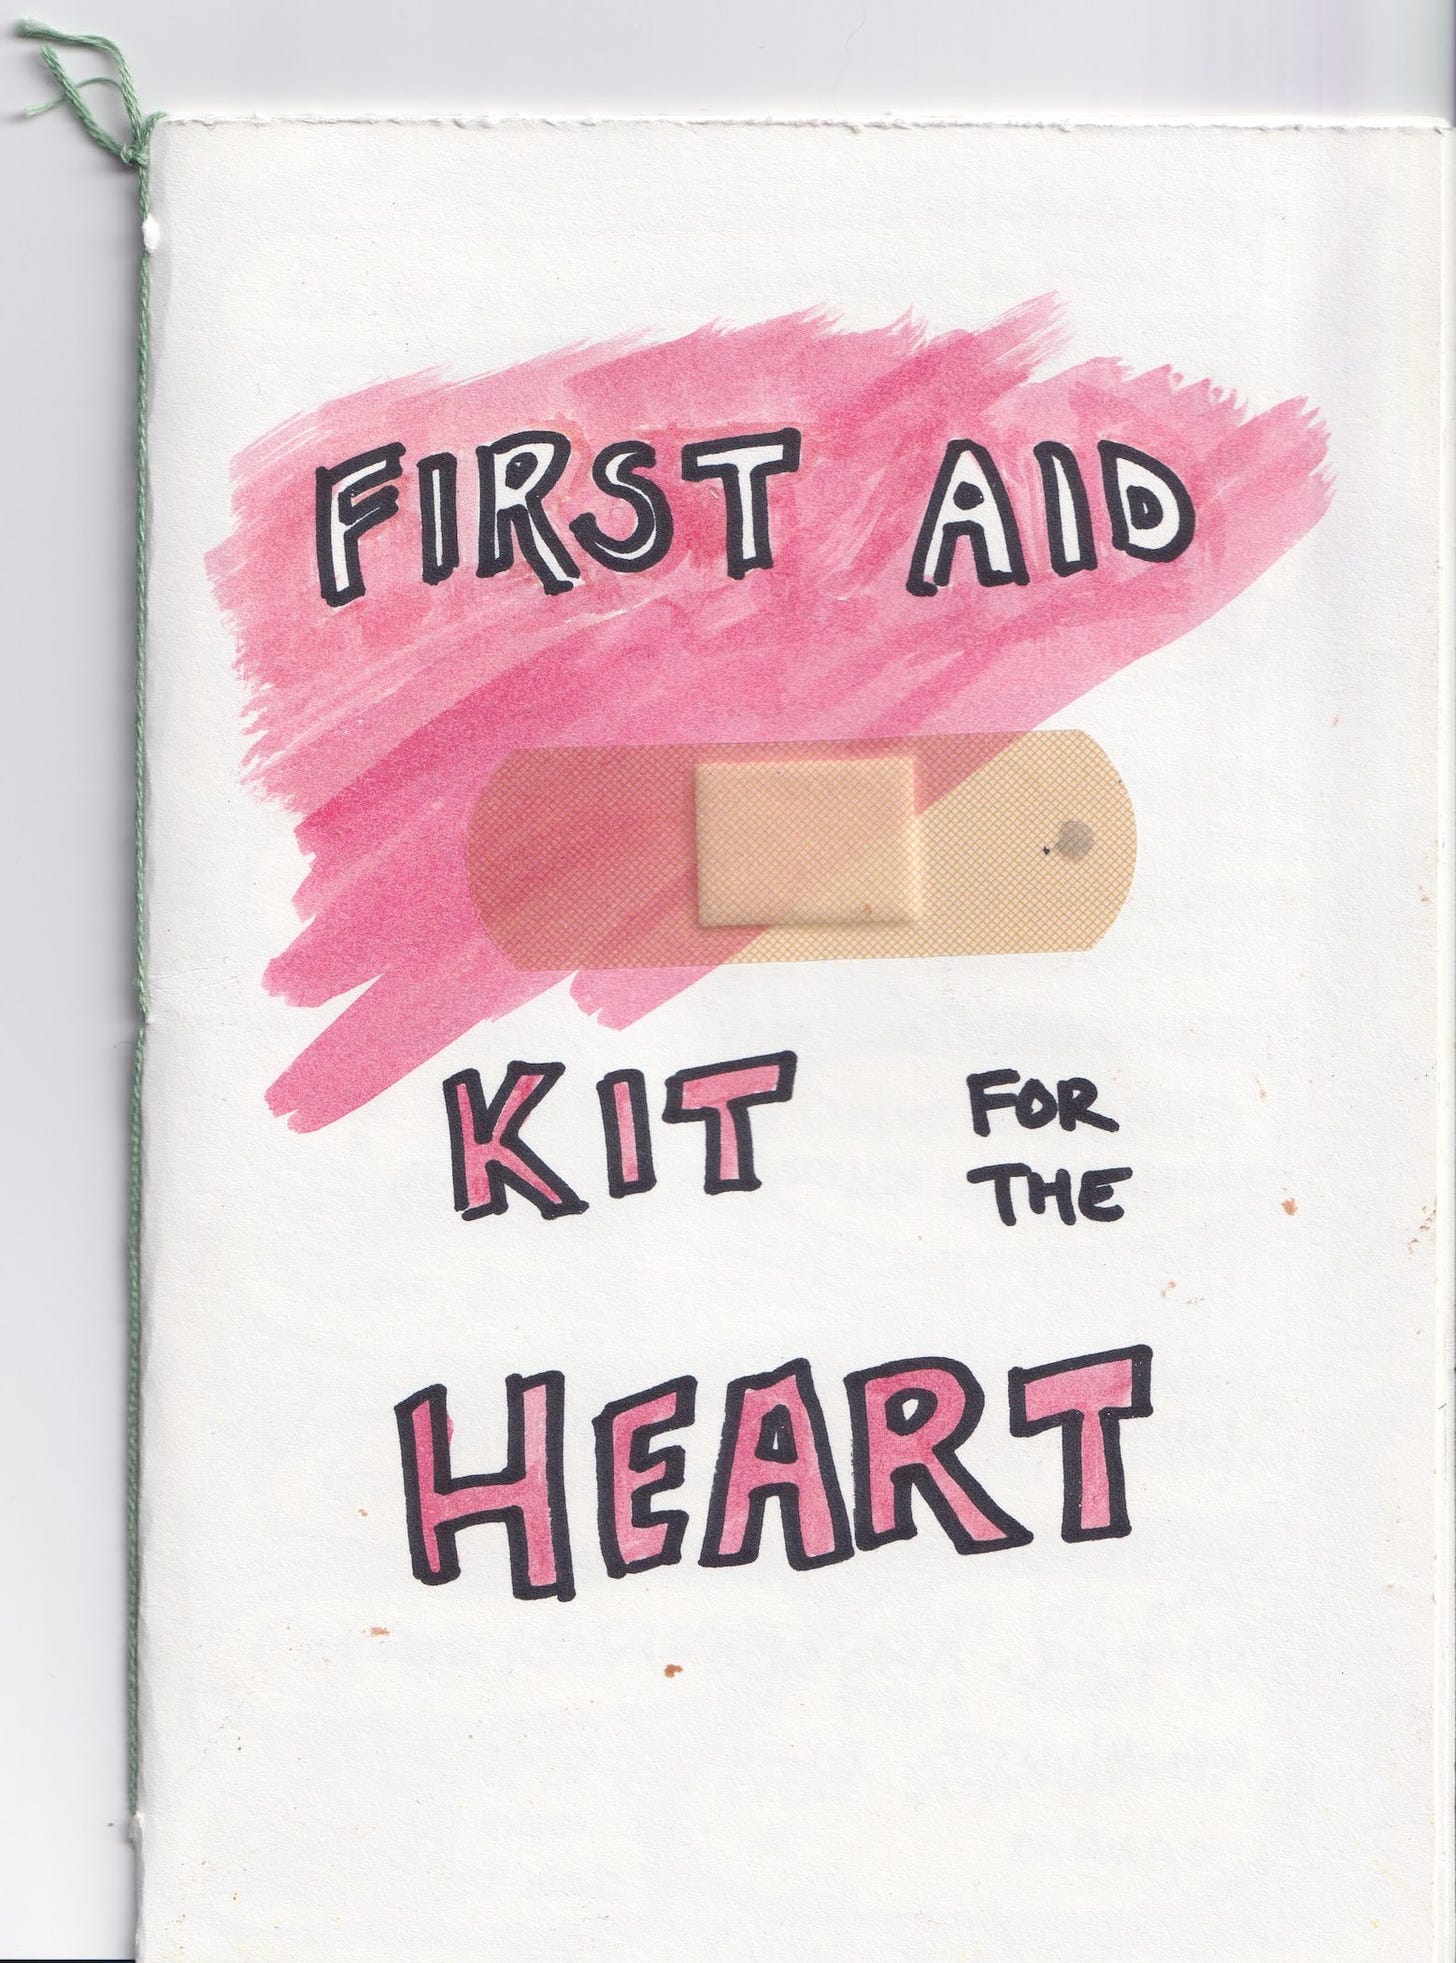 A photo scan of a water color and pastel zine.  The cover says “First Aid Kit for the Heart, and a bandaid is stuck in the middle”